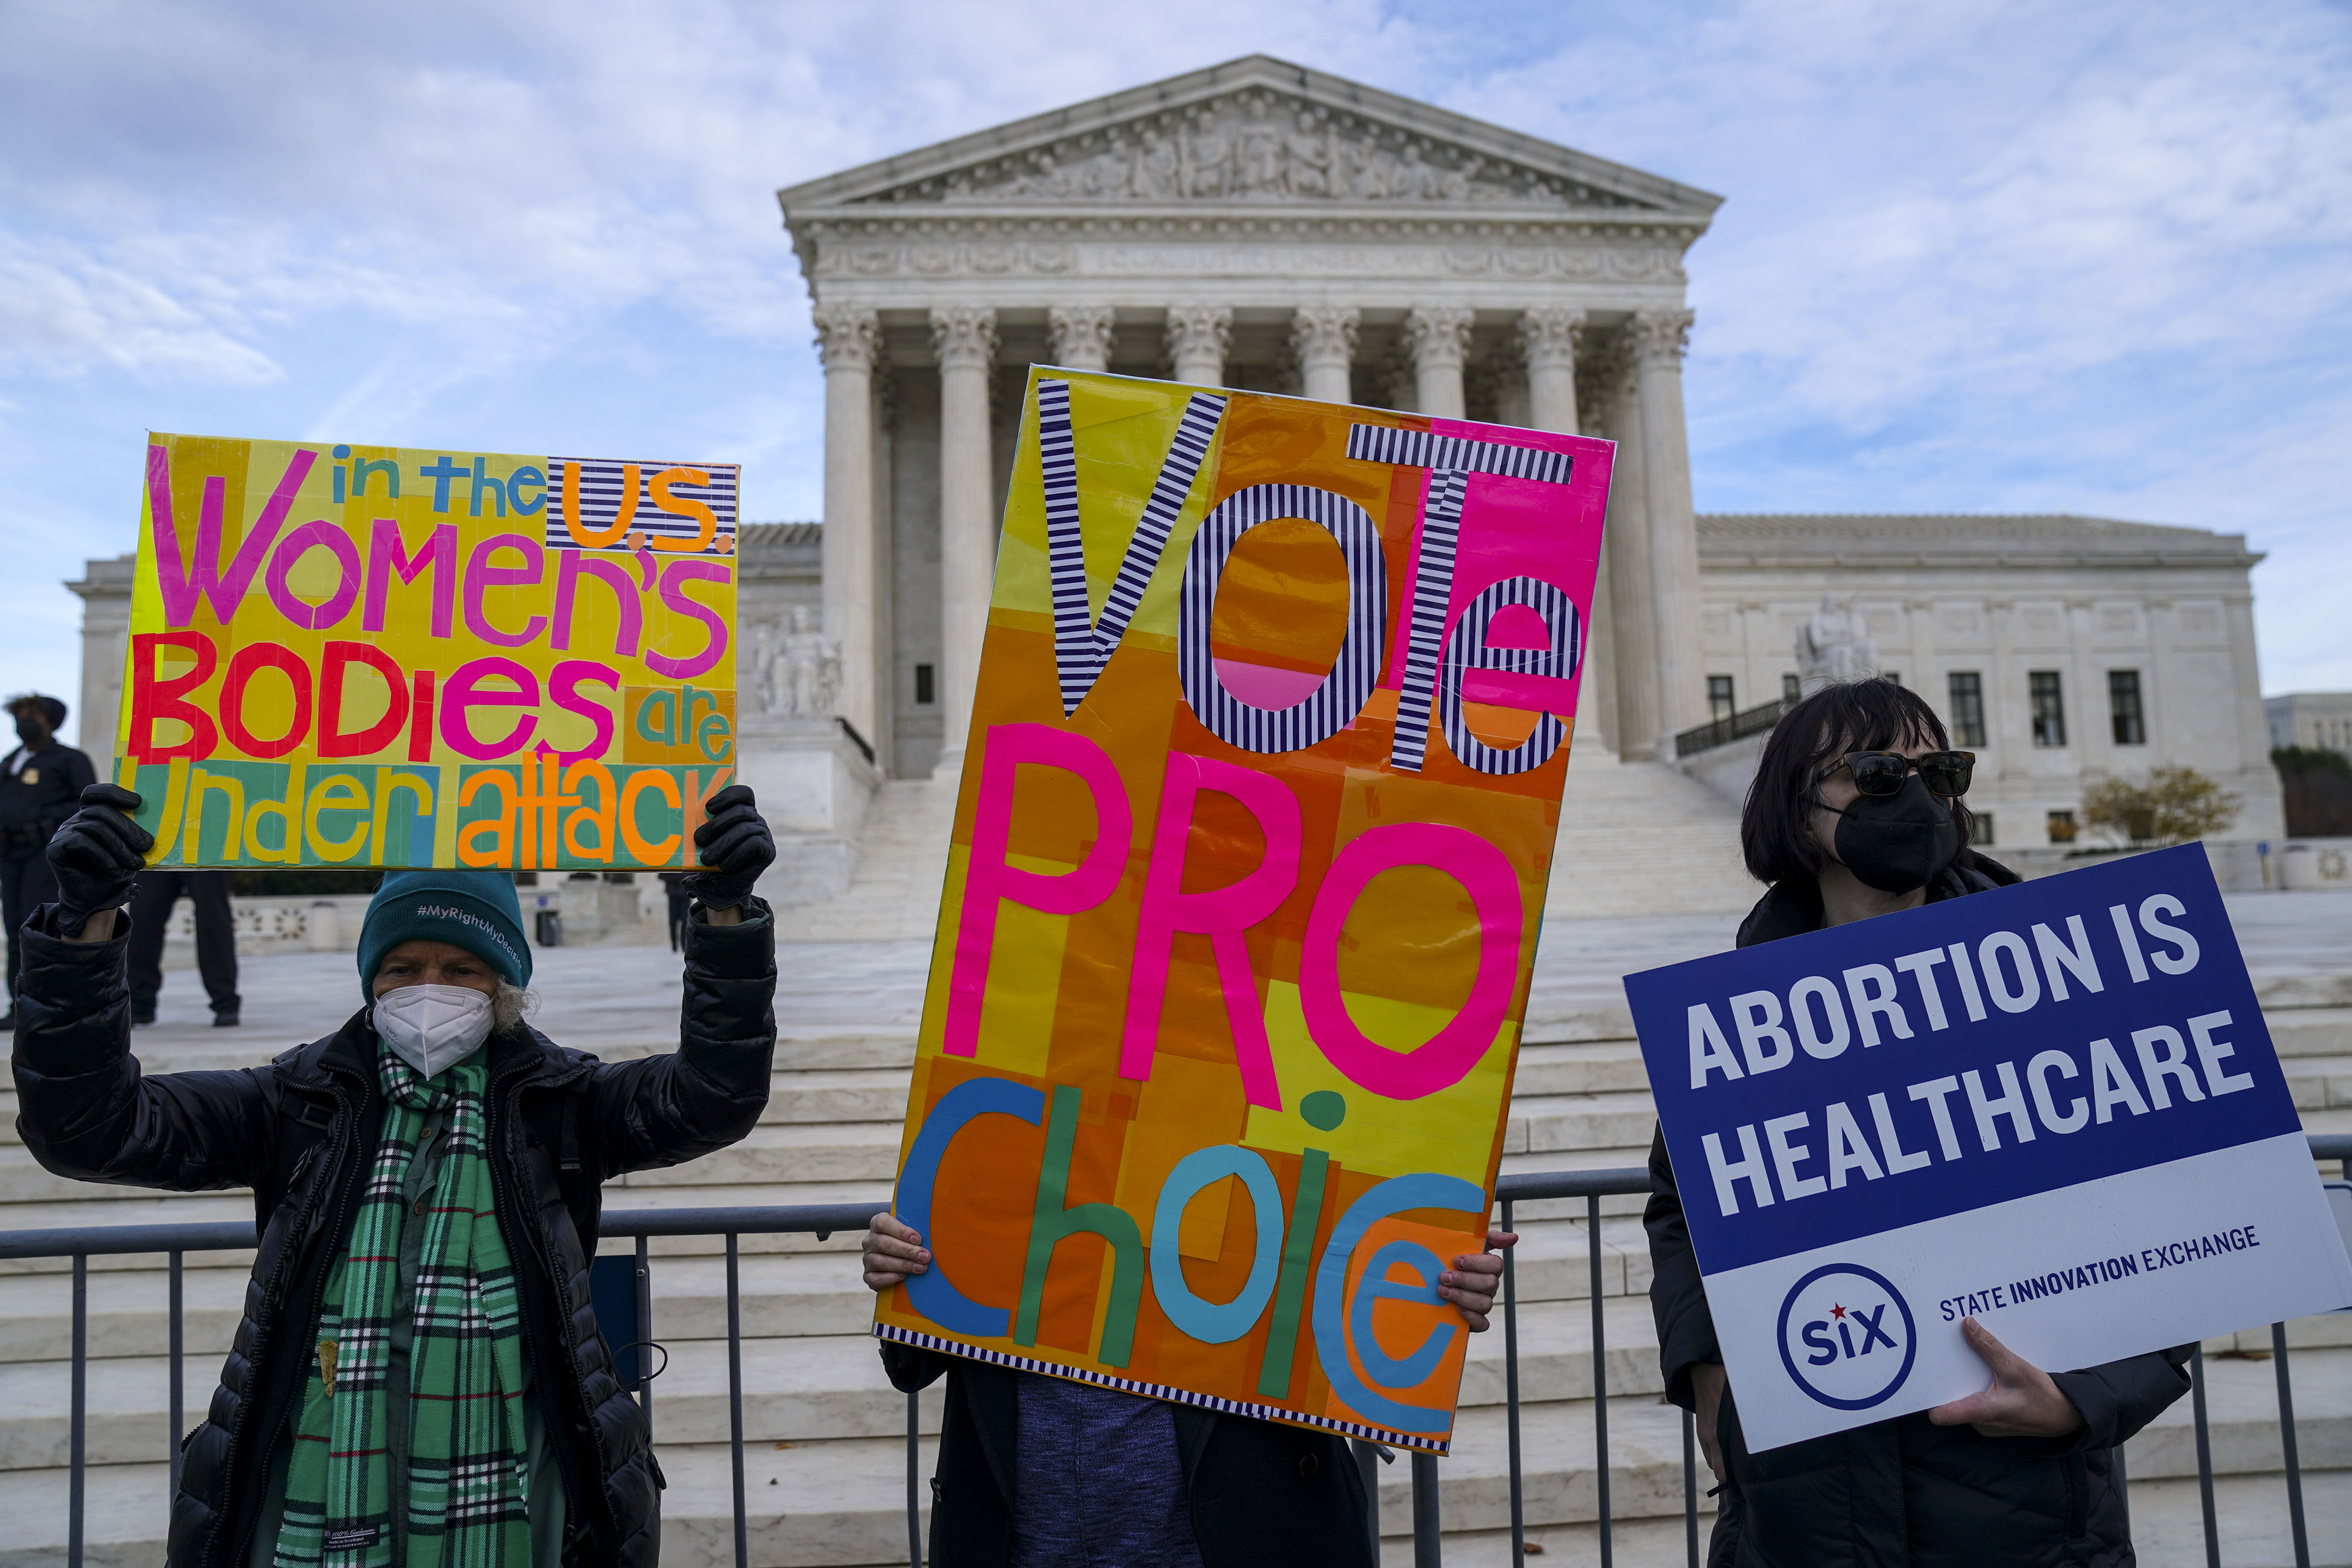 Protesters hold signs that read “Vote pro-choice,” “Abortion is healthcare,” and “In the U.S., women’s bodies are under attack.”